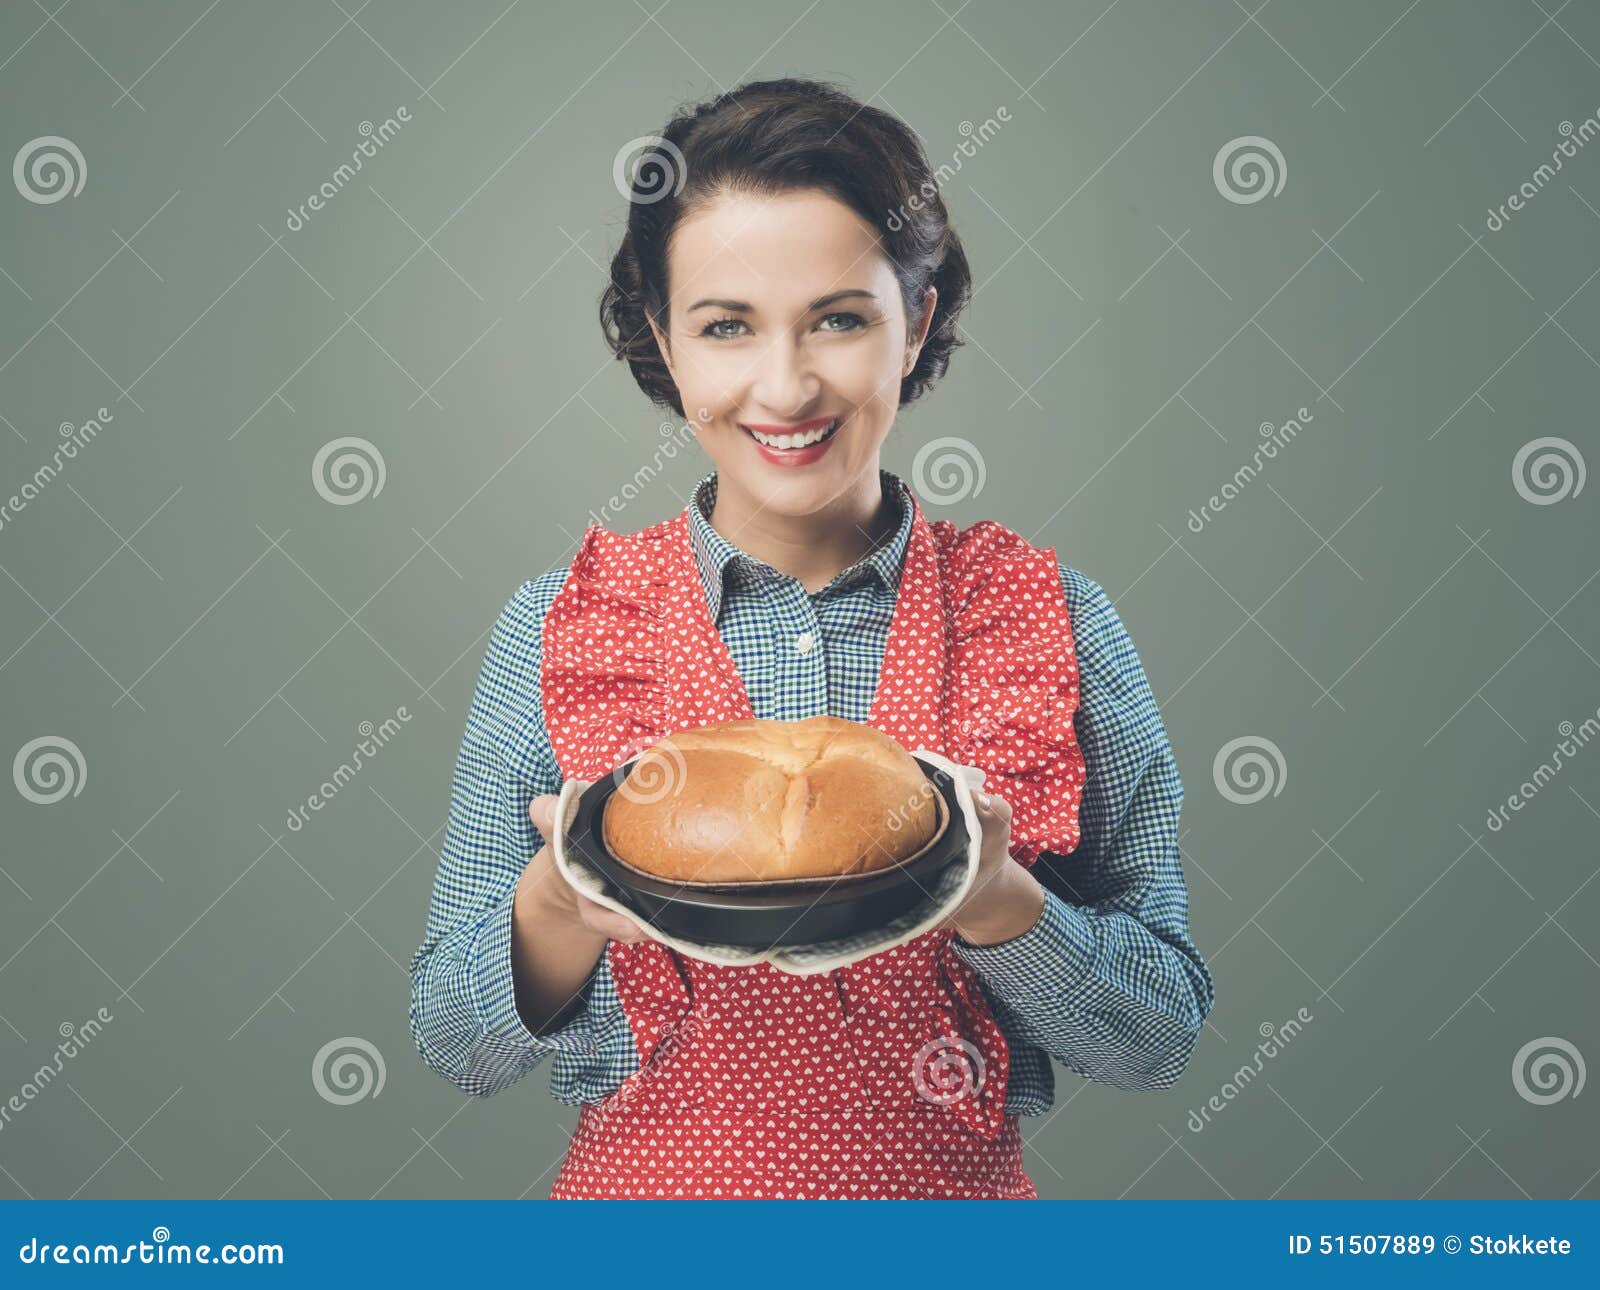 Vintage Housewife Holding an Homemade Cake Stock Image photo